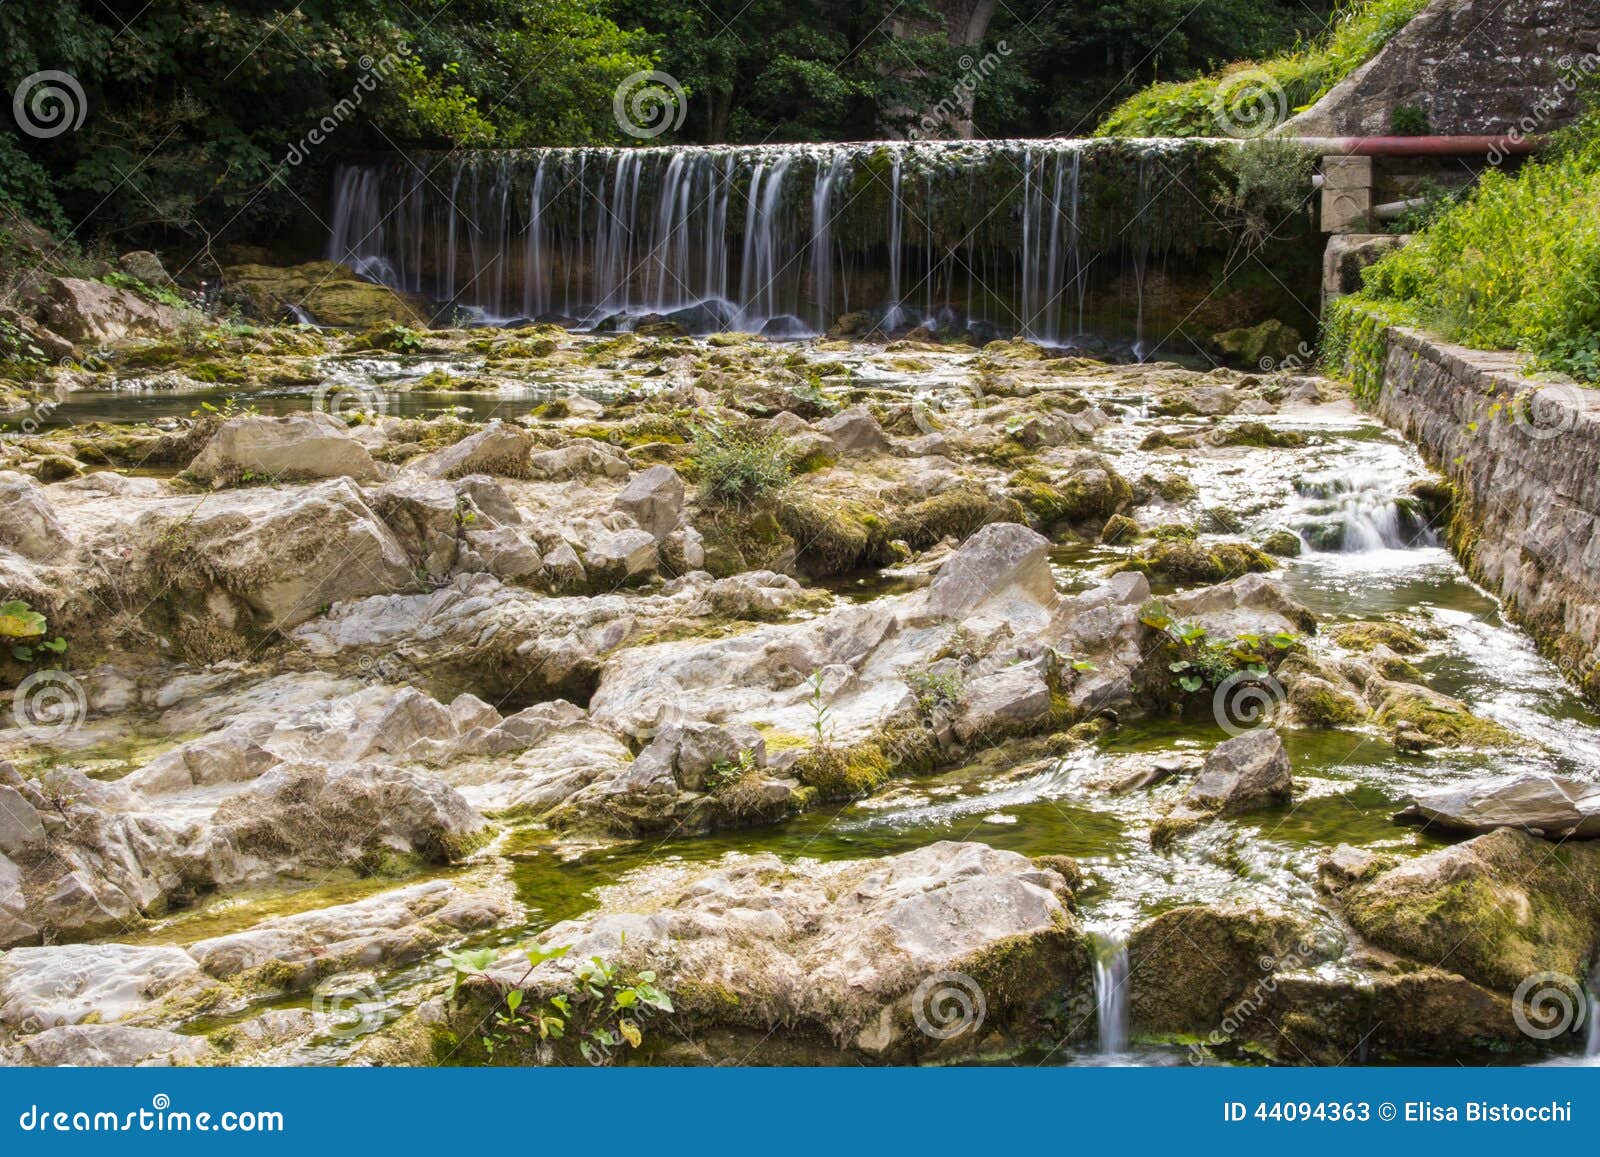 little waterfall in the appennino tosco-emiliano